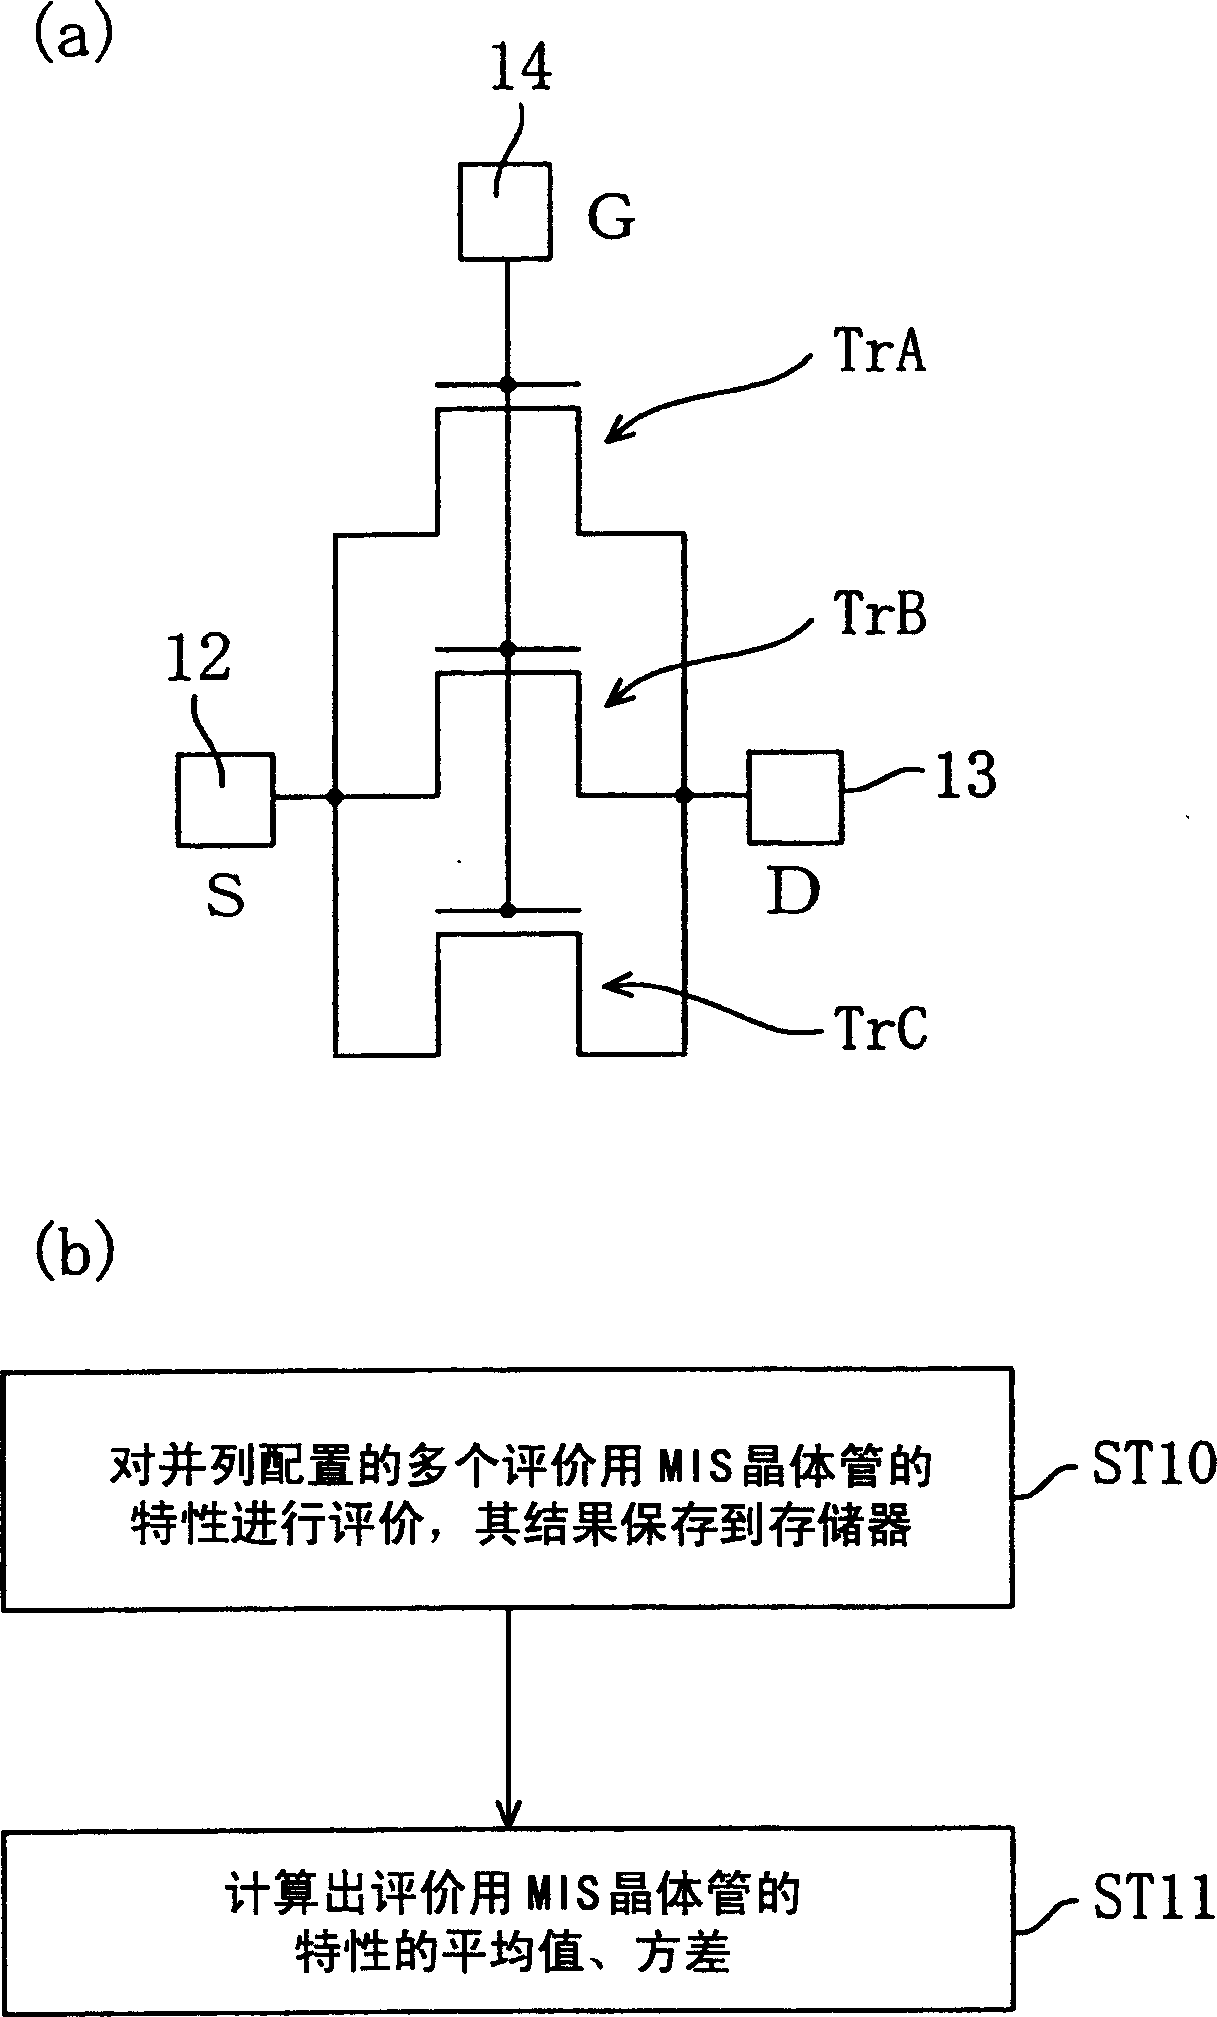 Semiconductor device and method for evaluating characteristics of the same